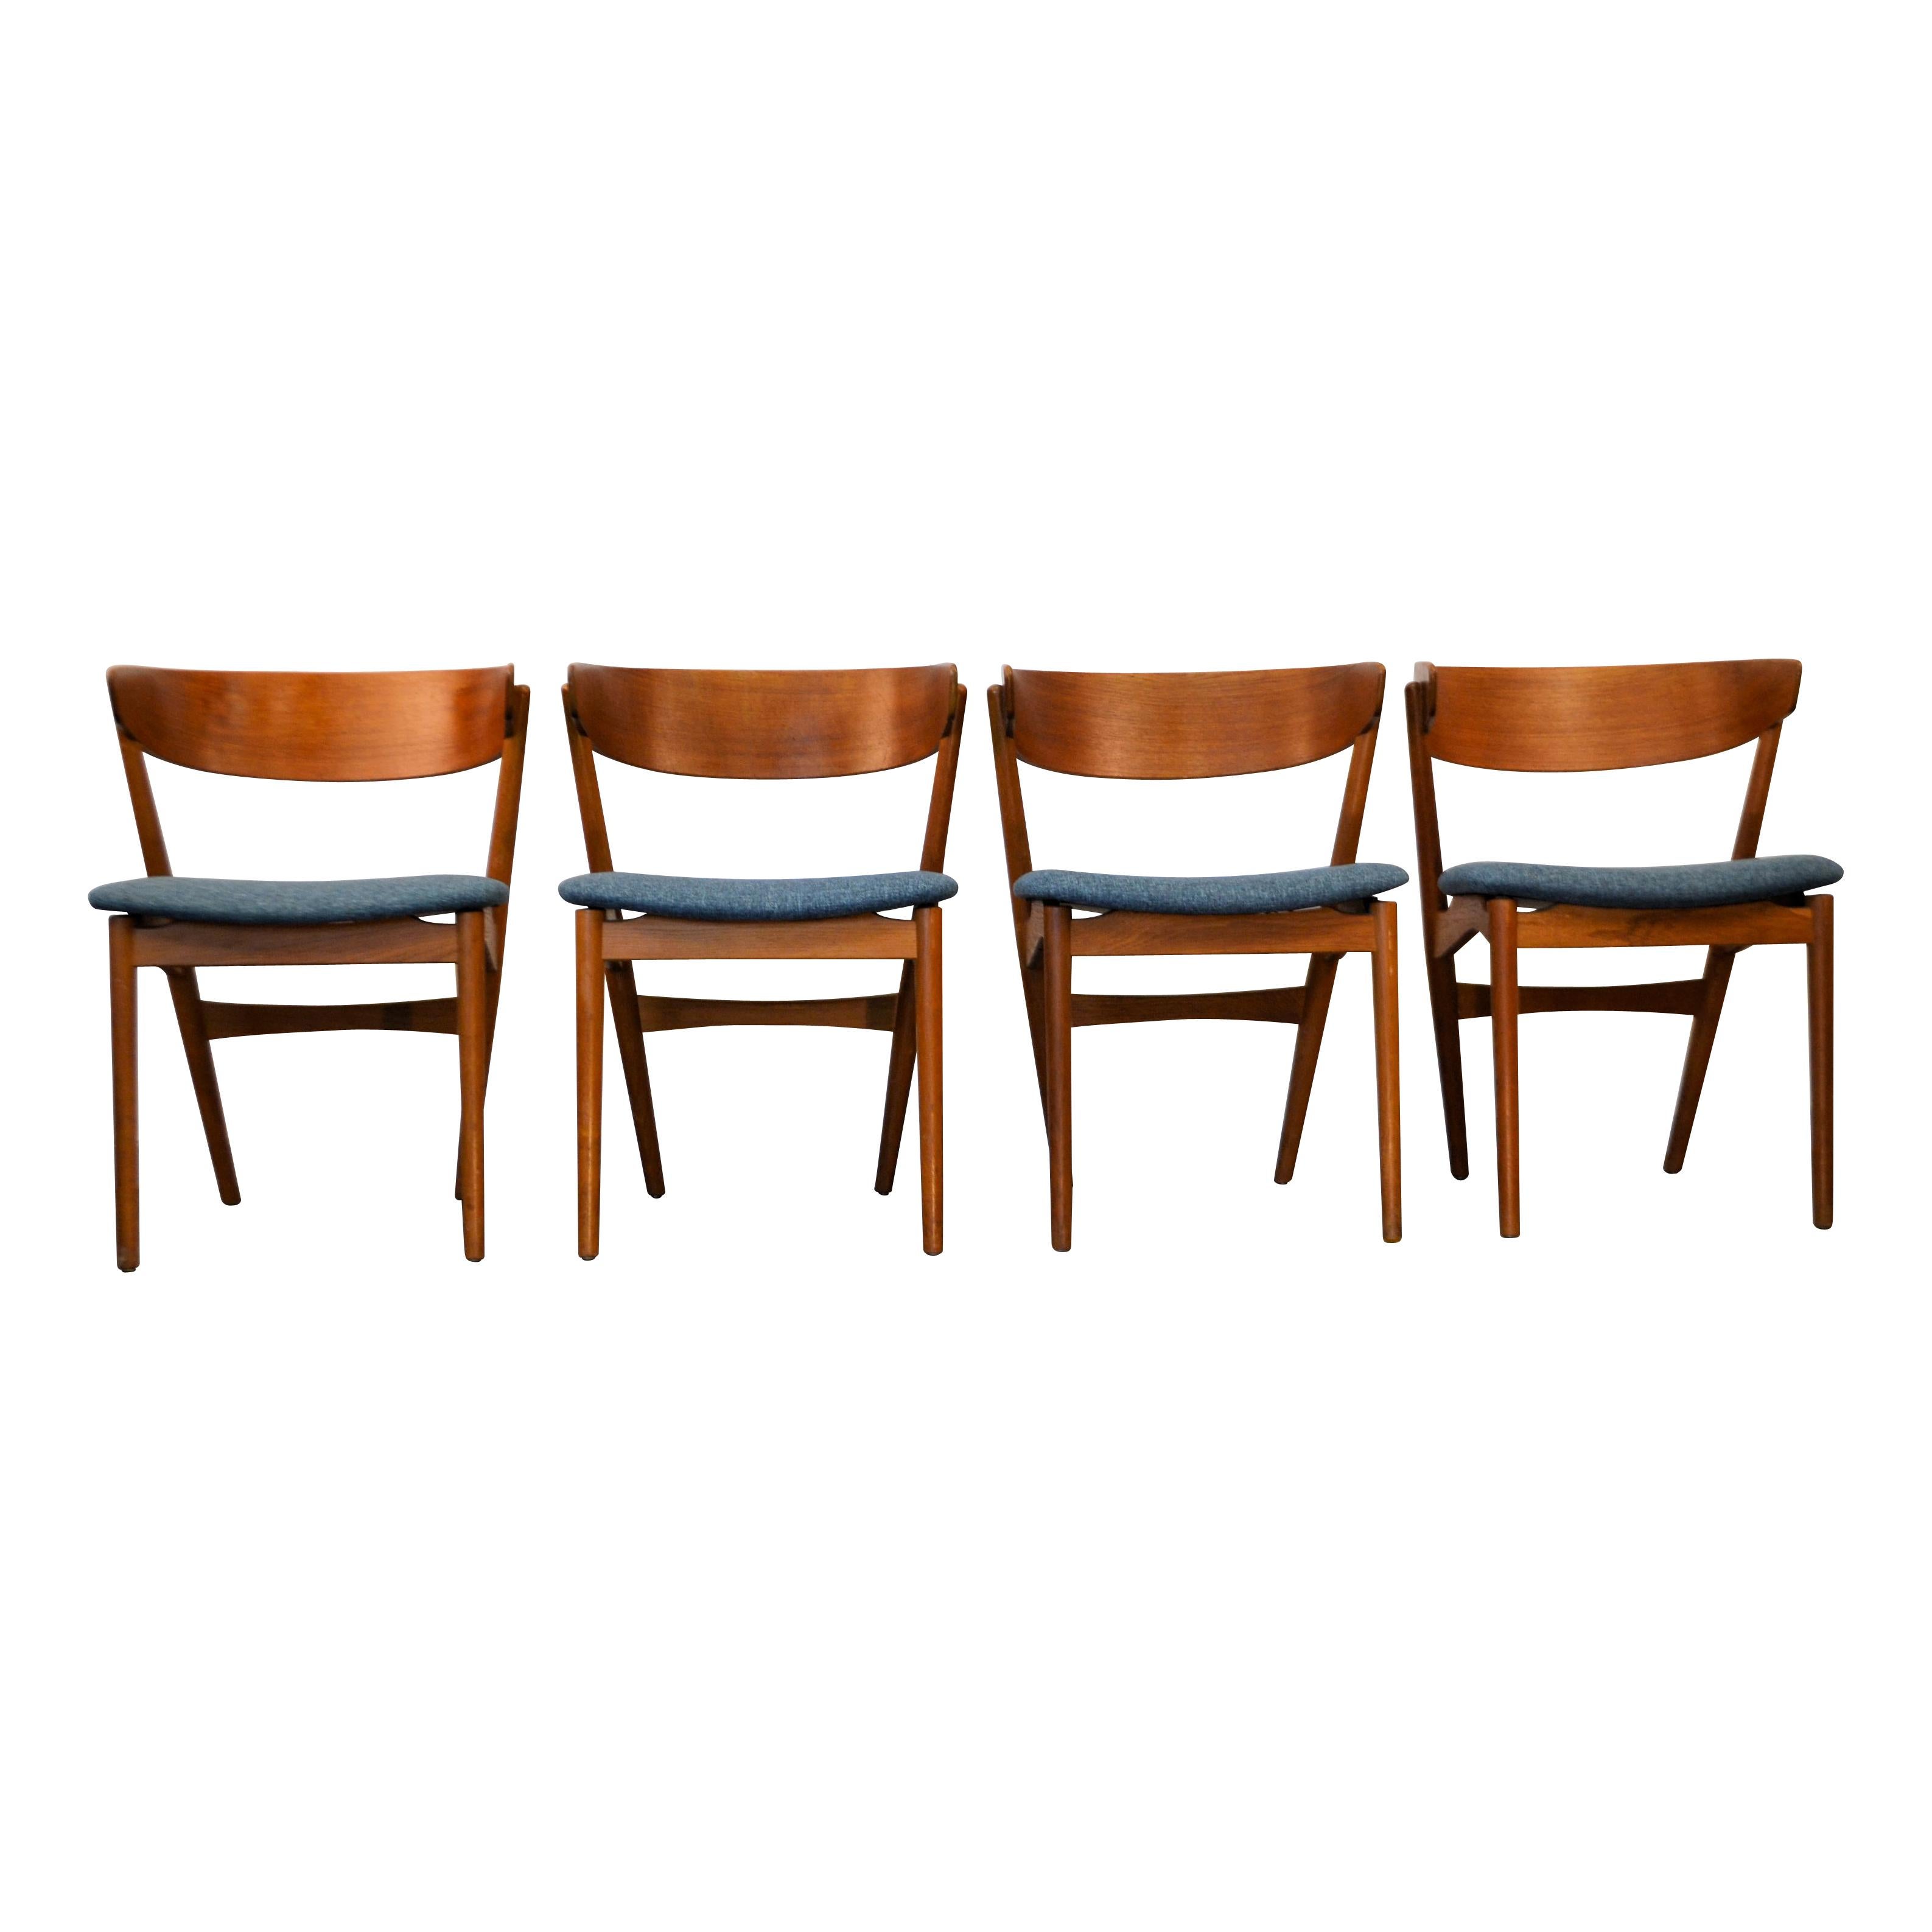 Stylish set of four vintage teak dining chairs model #7 designed by Helge Sibast for Danish manufacturer Sibast. Helge Sibast grew up in the family company Sibast Mobler, and designed the most successful designs of the company and the Danish Modern